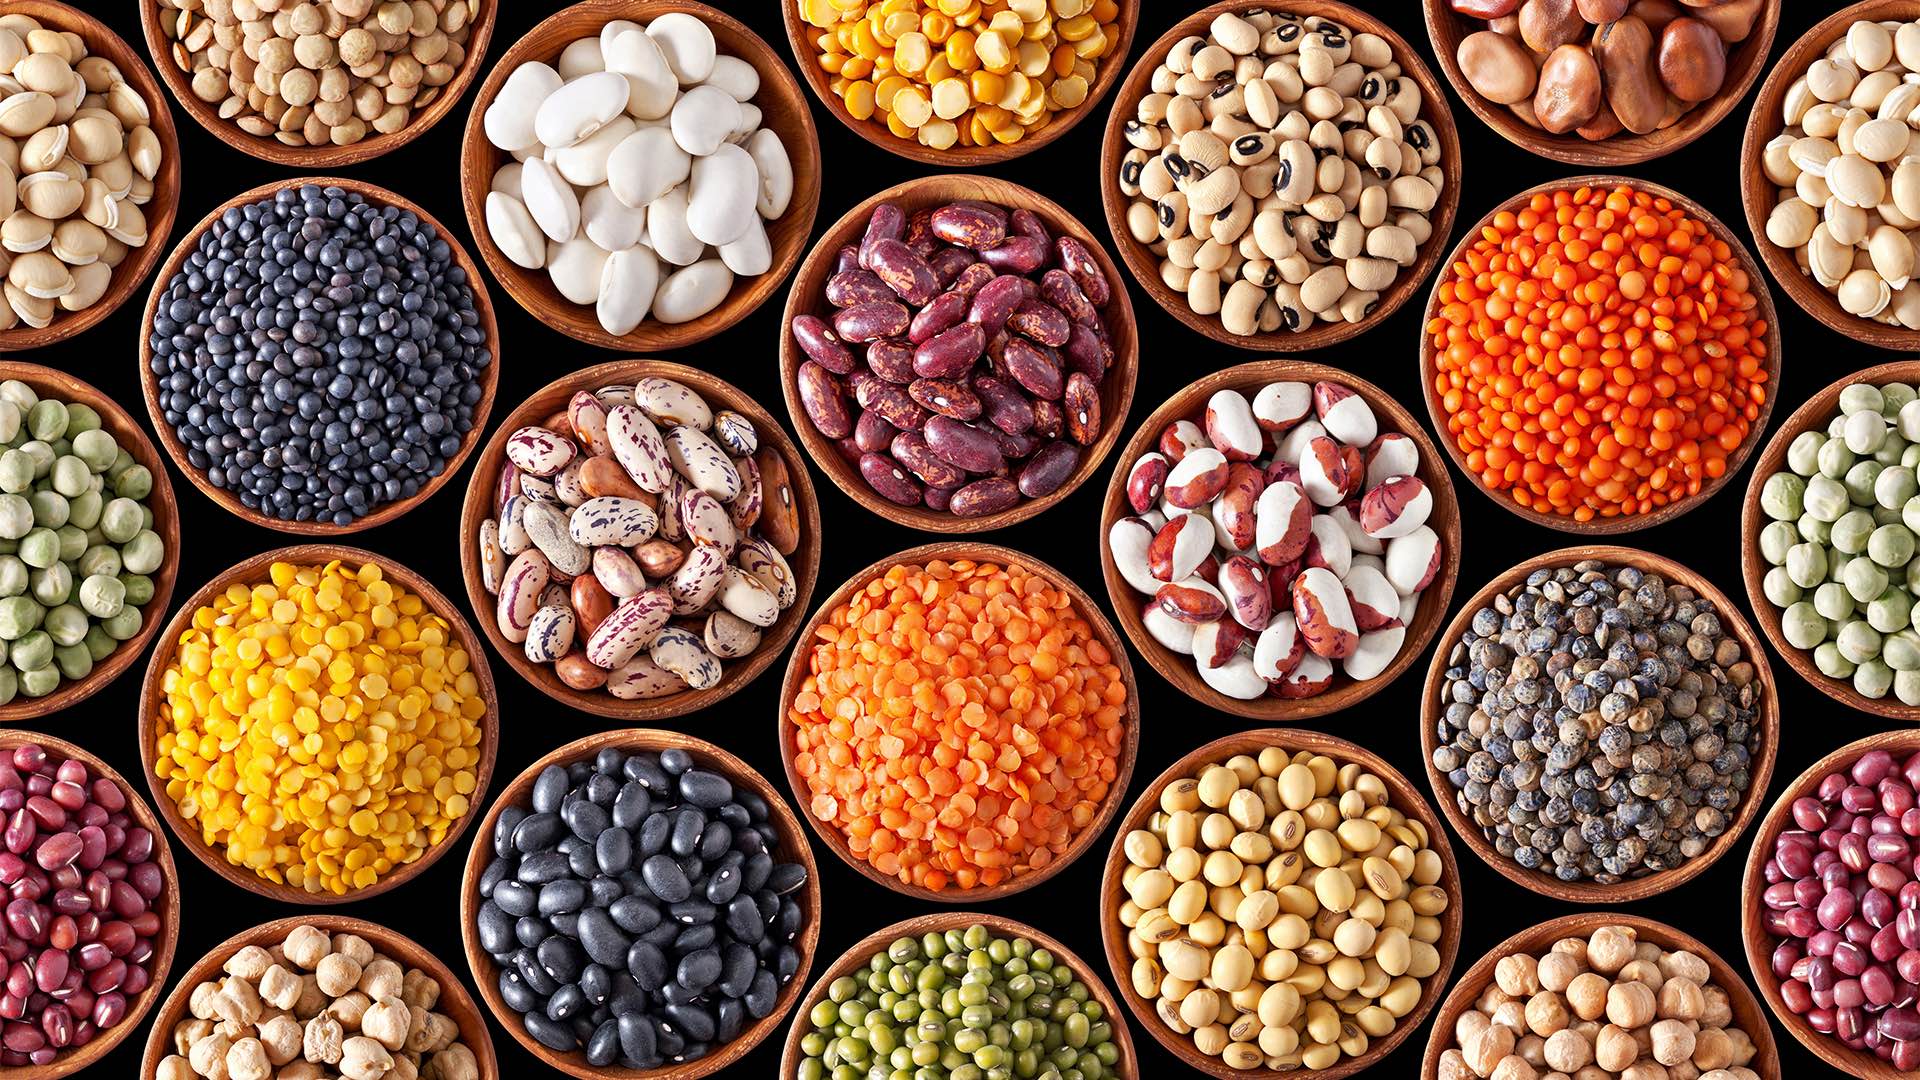 Organic Beans and Lentils: Nutritional Value and Heart Health Benefits